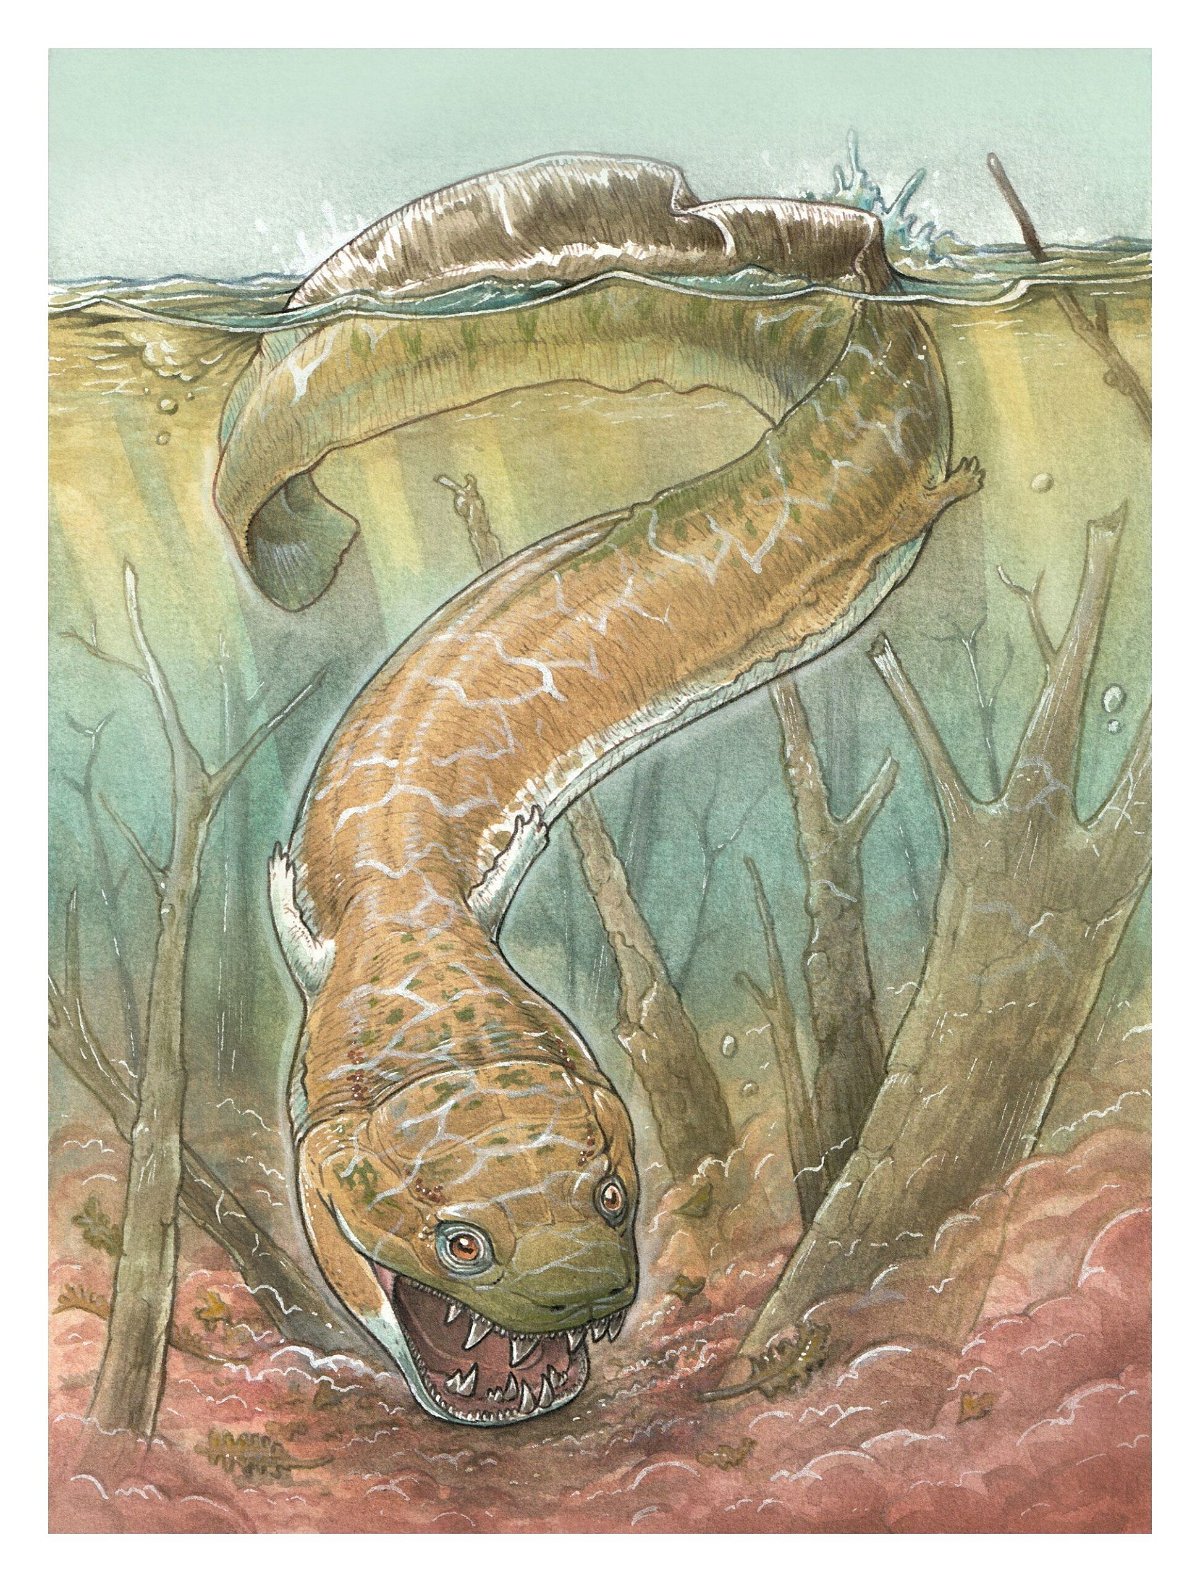 <i>Gabriel Lio/Courtesy Field Museum via CNN Newsource</i><br/>An illustration depicts Gaiasia jennyae lurking at the bottom of a swamp